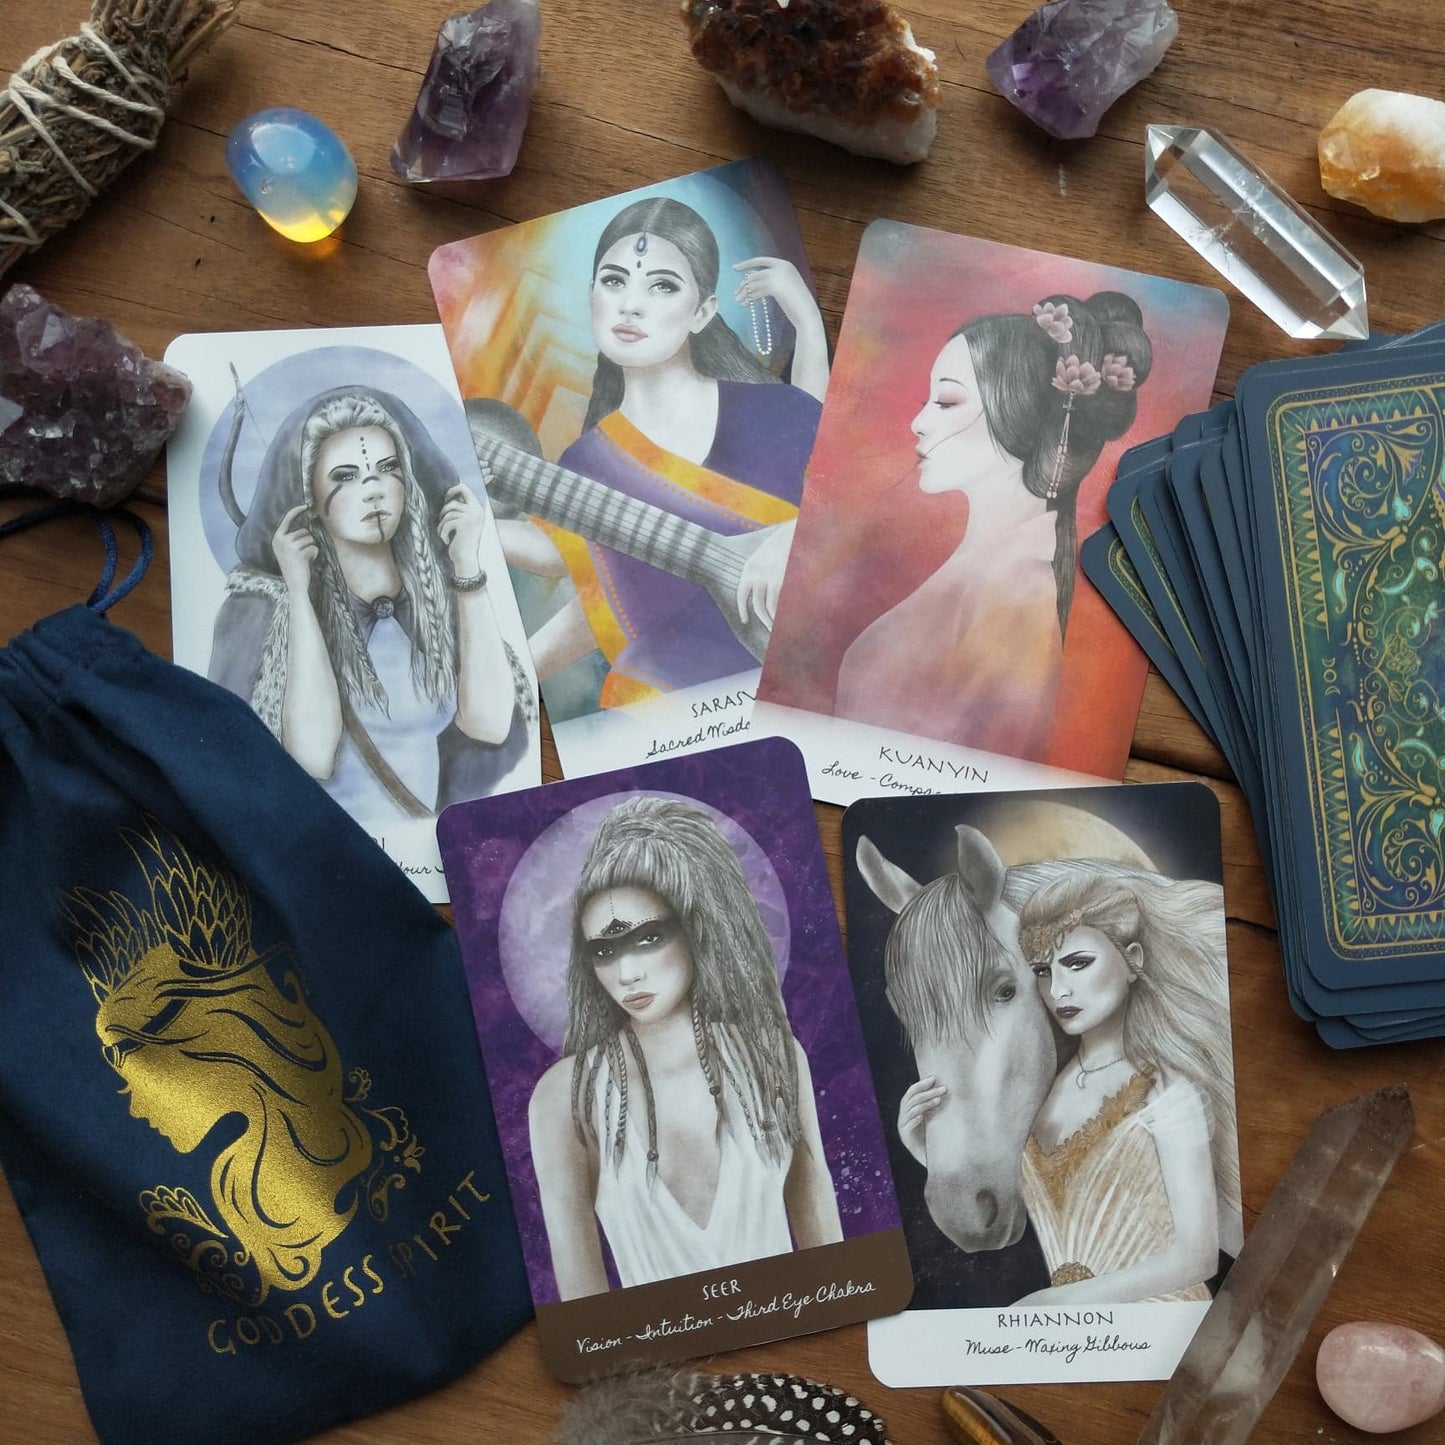 Goddess Spirit Oracle Deck - Indi edition - Includes FREE 5x7" print of your choice